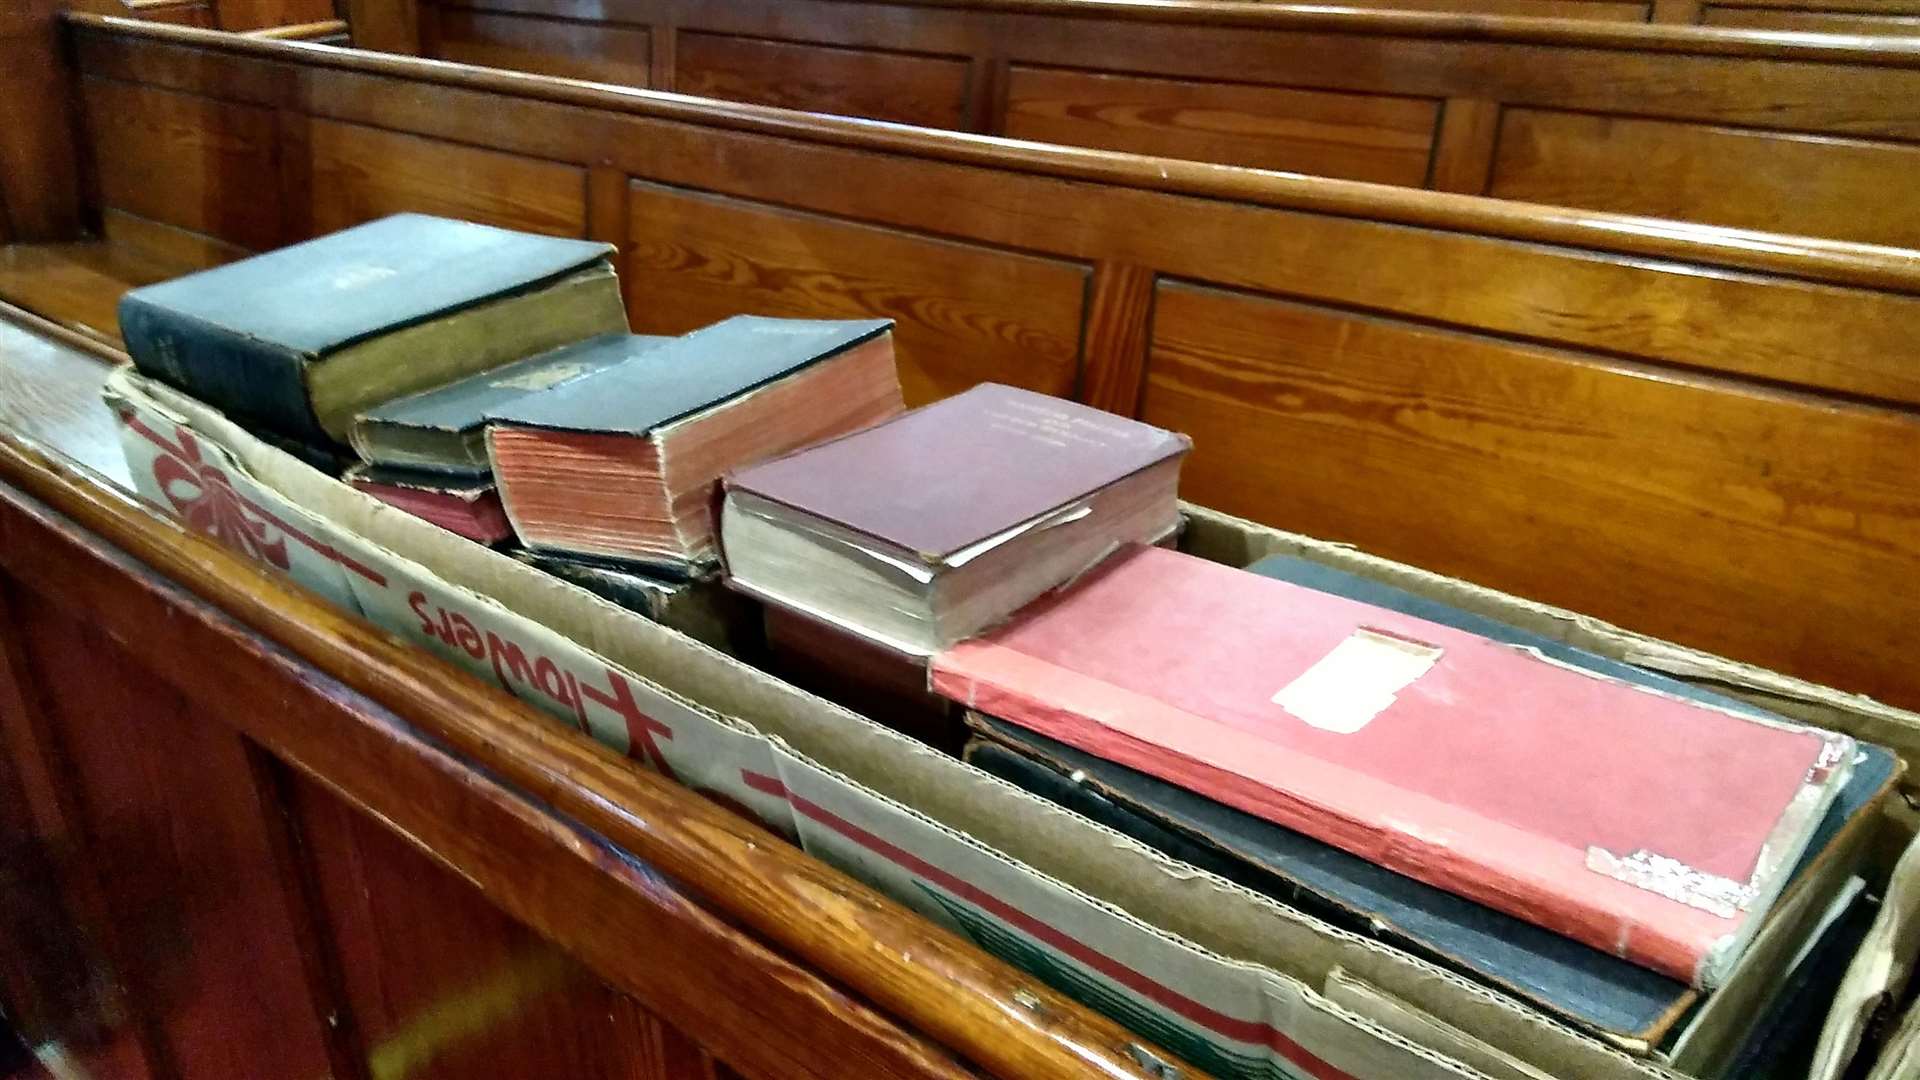 The old Inverness Burgh Council Bibles and other books have now been removed from the Old High Church for safekeeping.